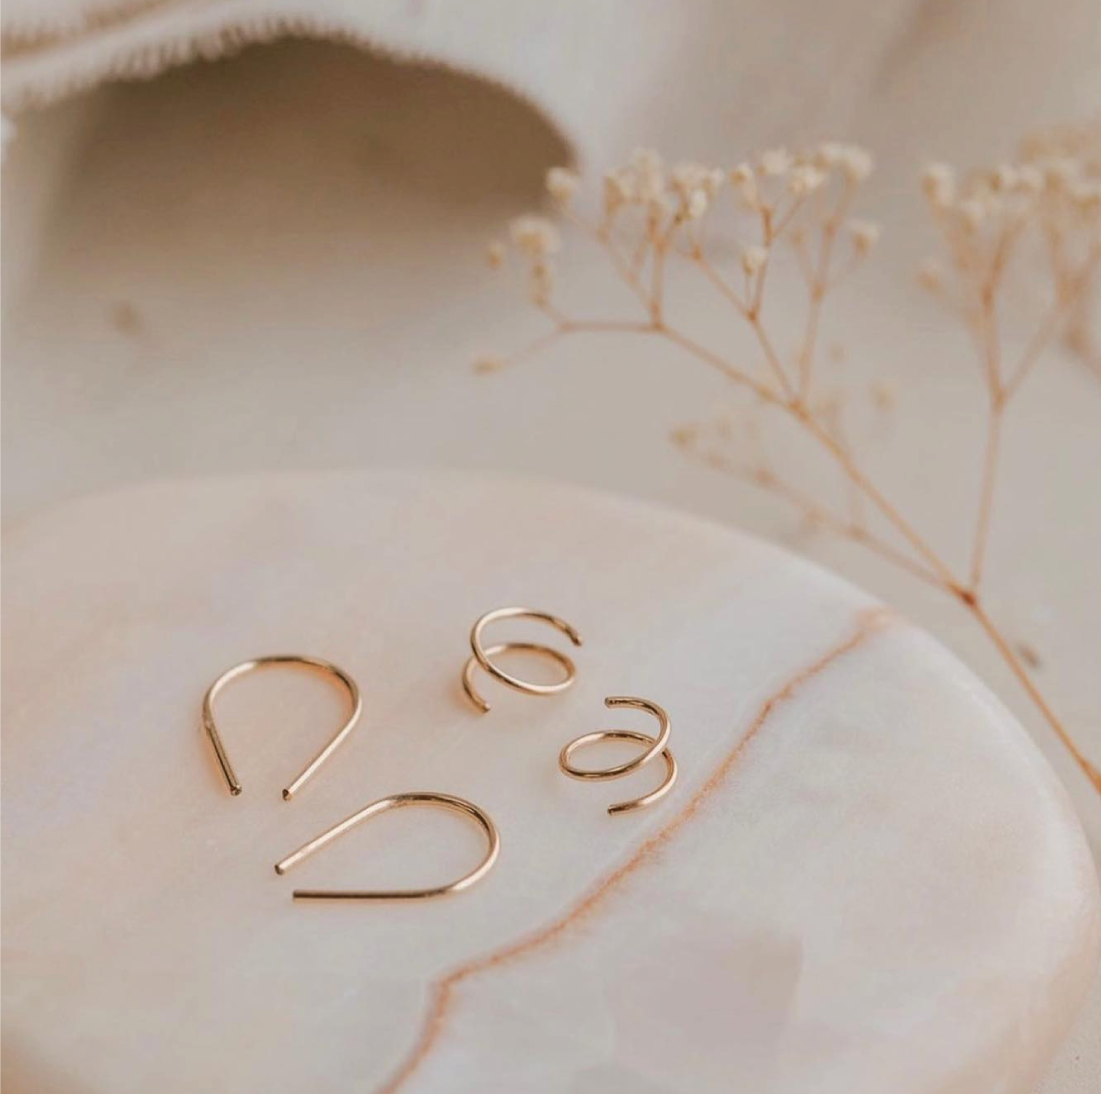 Hello Adorn's Tiny Horseshoe Earrings and Tiny Twists are best-sellers at Narrative + Co